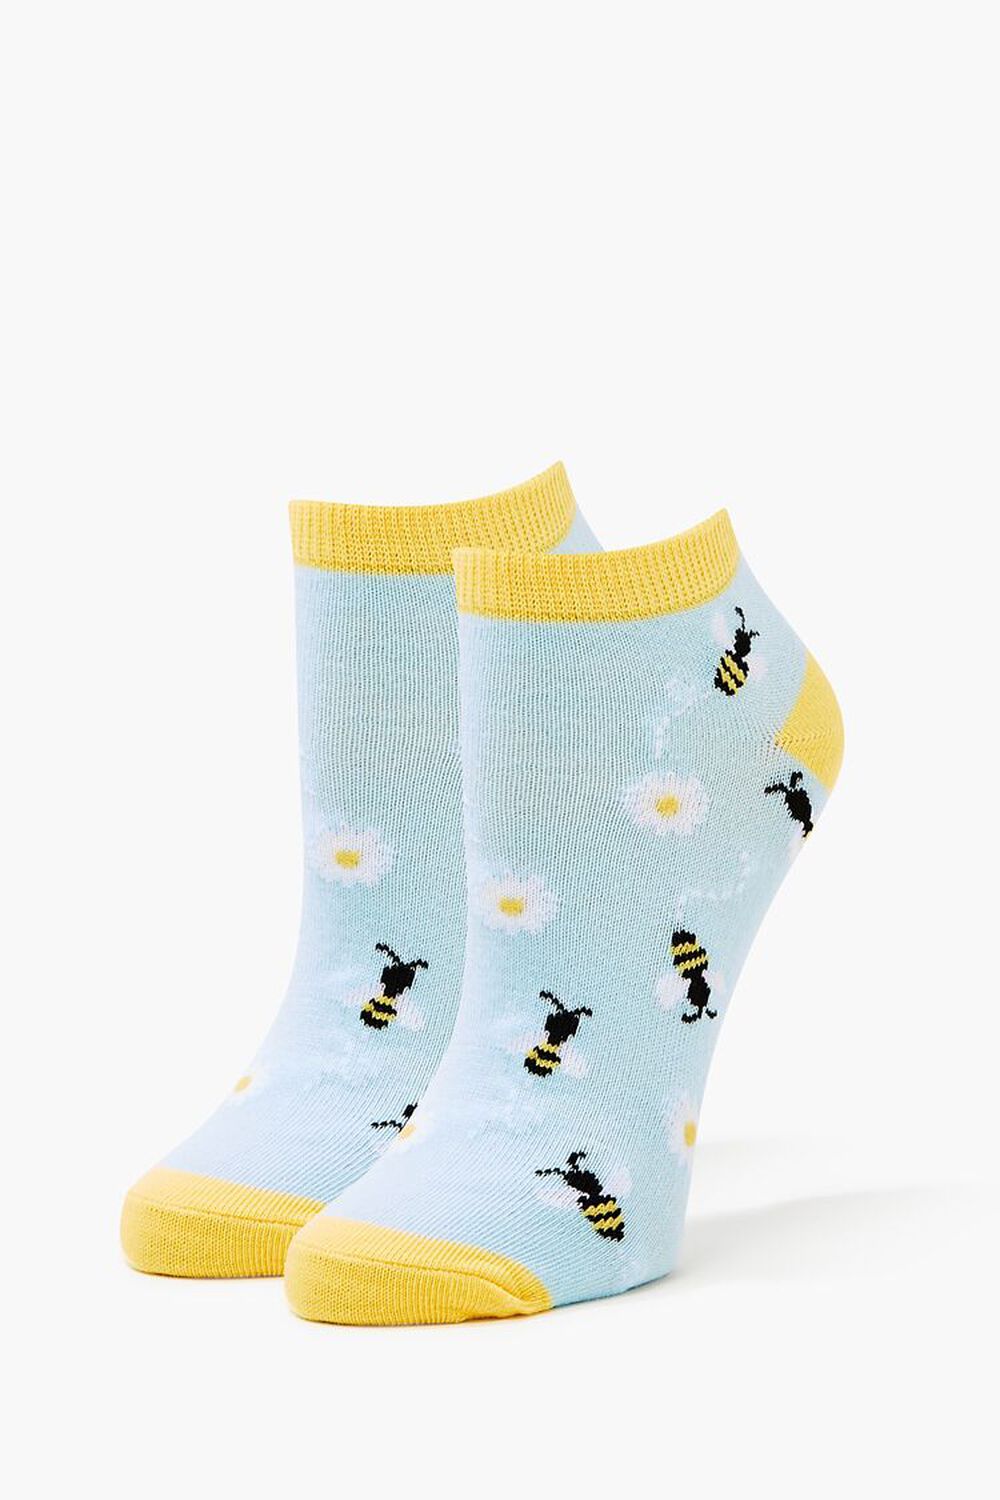 BLUE/MULTI Bee Graphic Ankle Socks, image 1